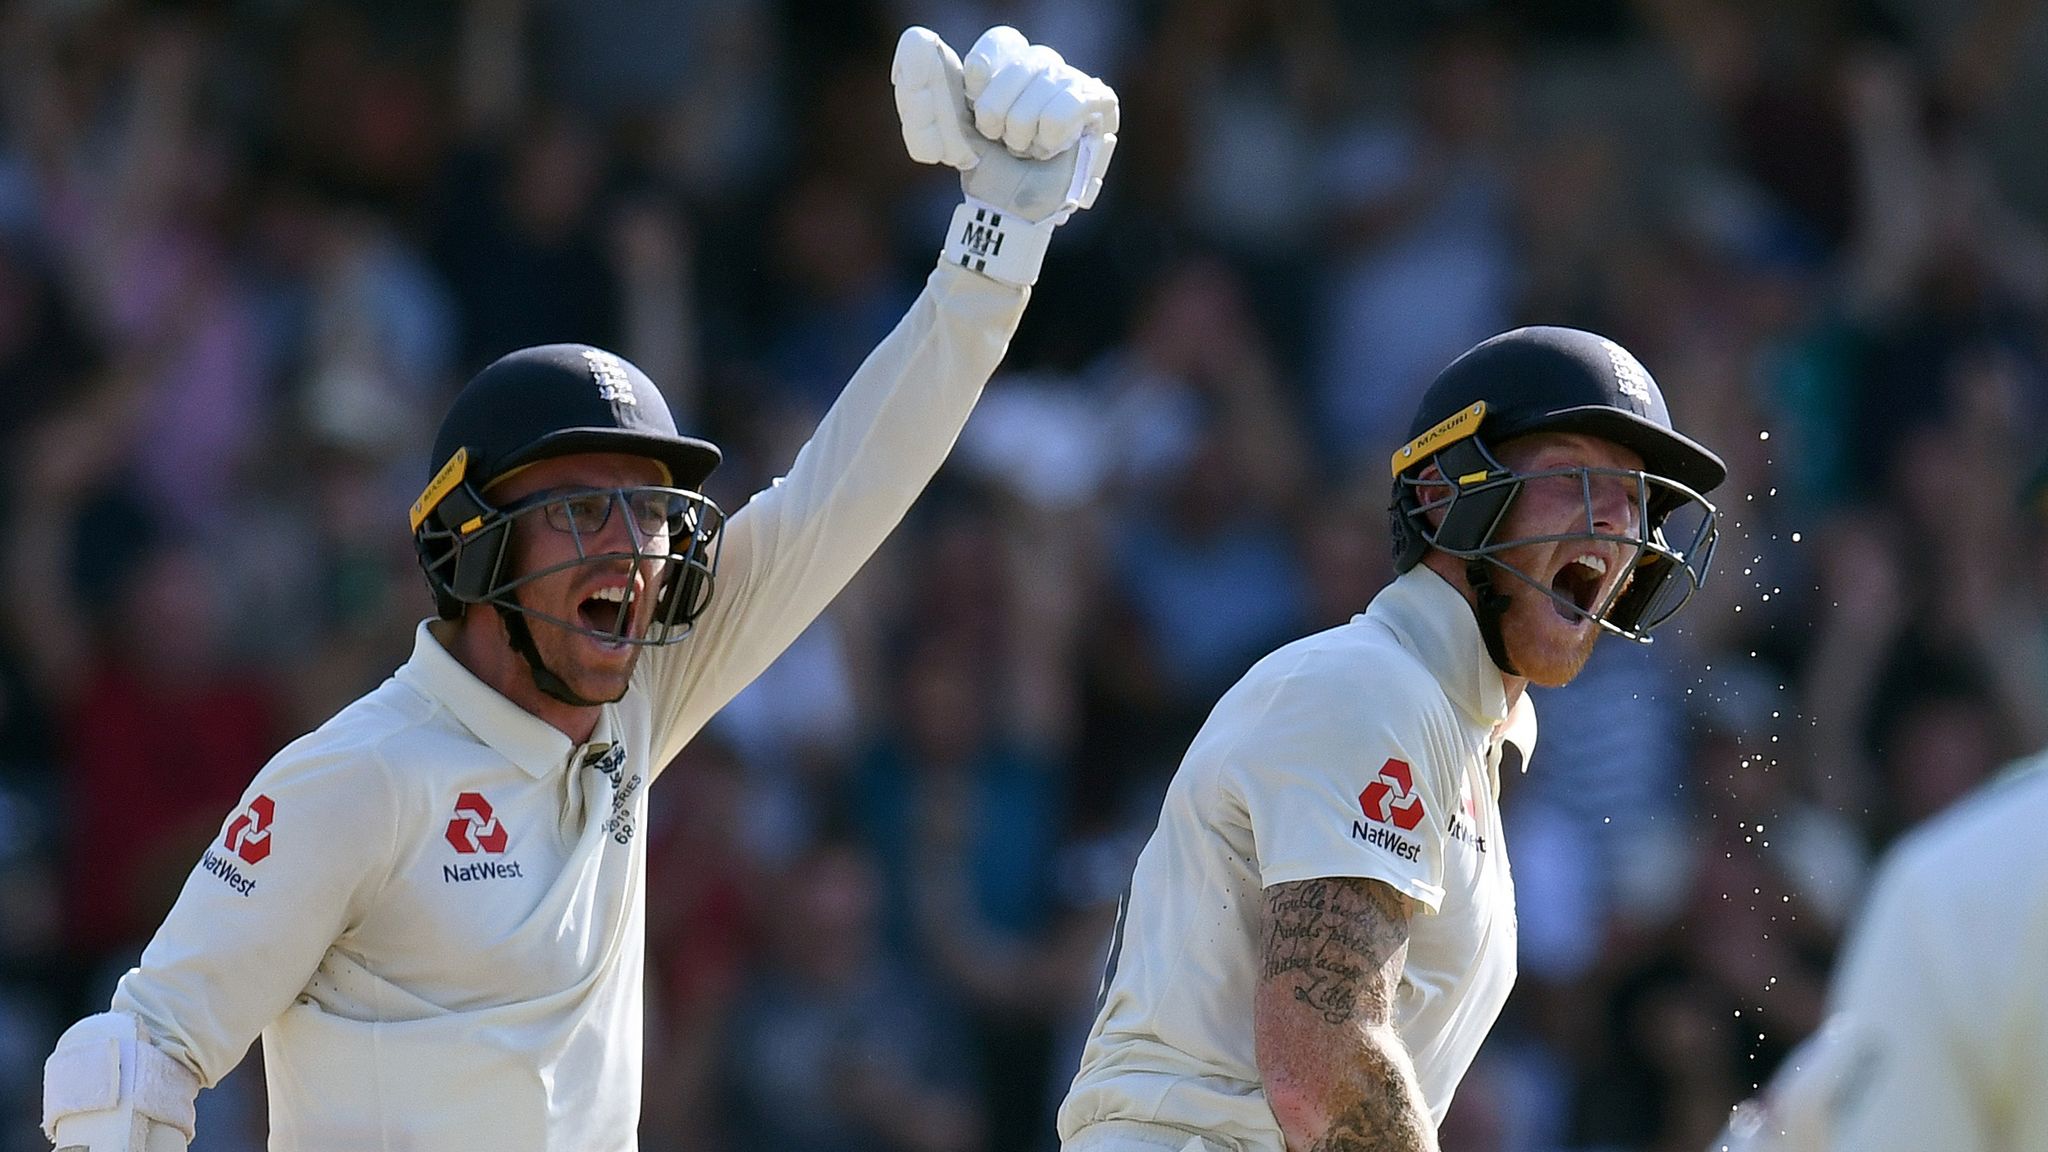 Ashes 2019 Ben Stokes Headingley Innings The Most Remarkable I Ve Seen Says Nasser Hussain Cricket News Sky Sports